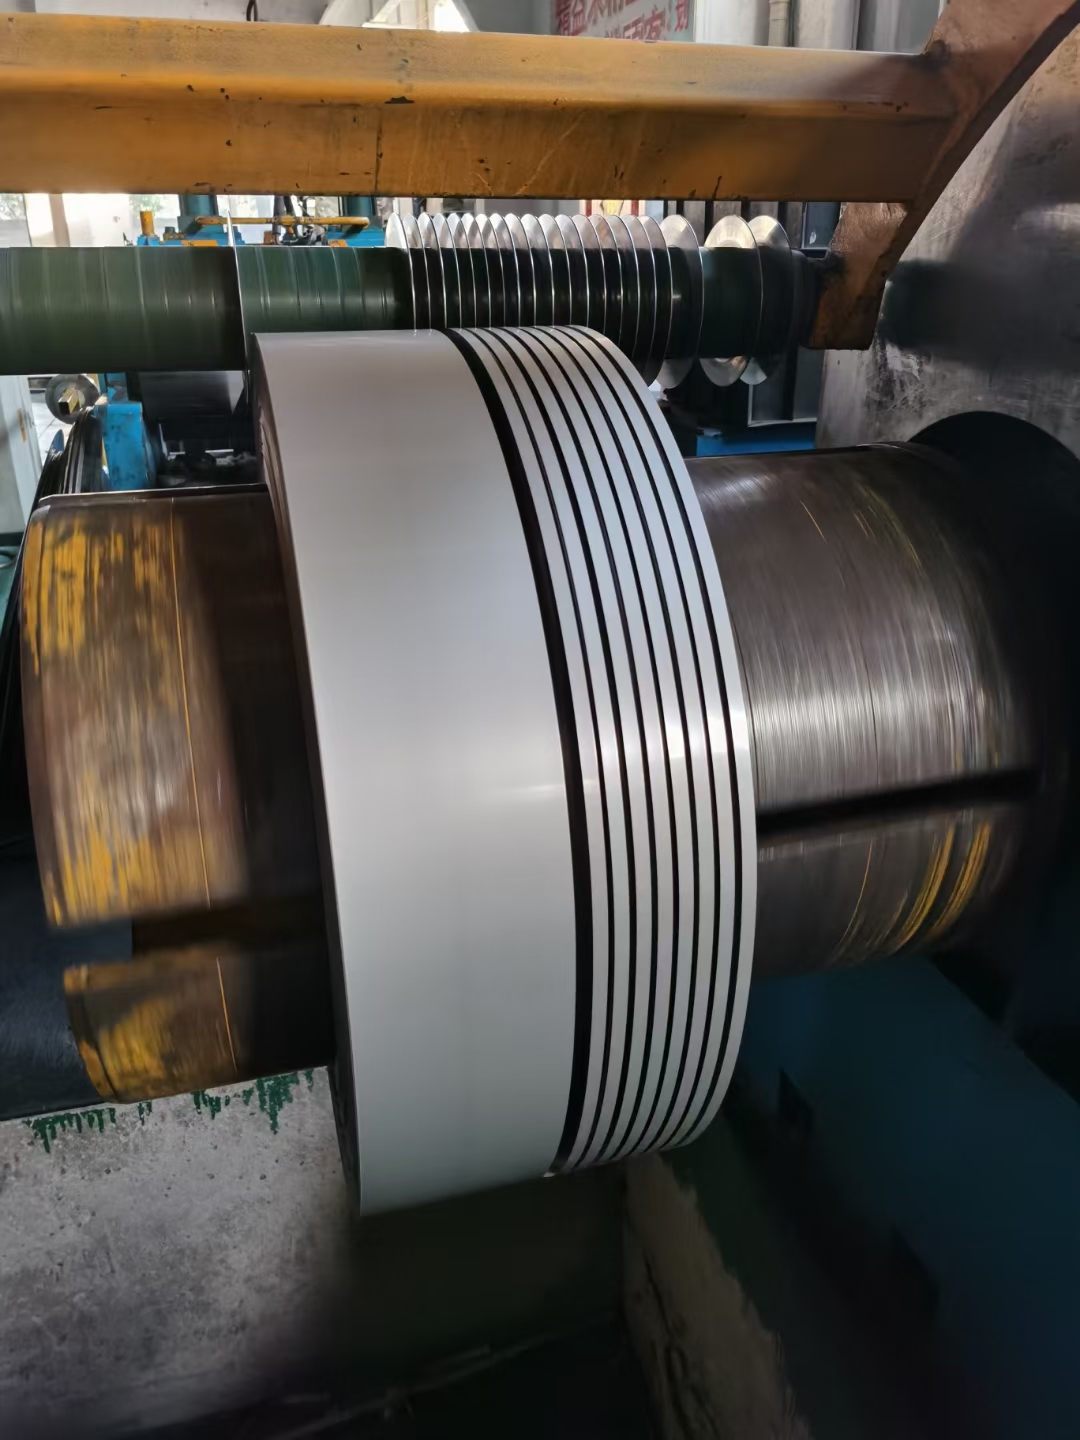 304 Stainless Steel Strips, AISI 304 SS Strips